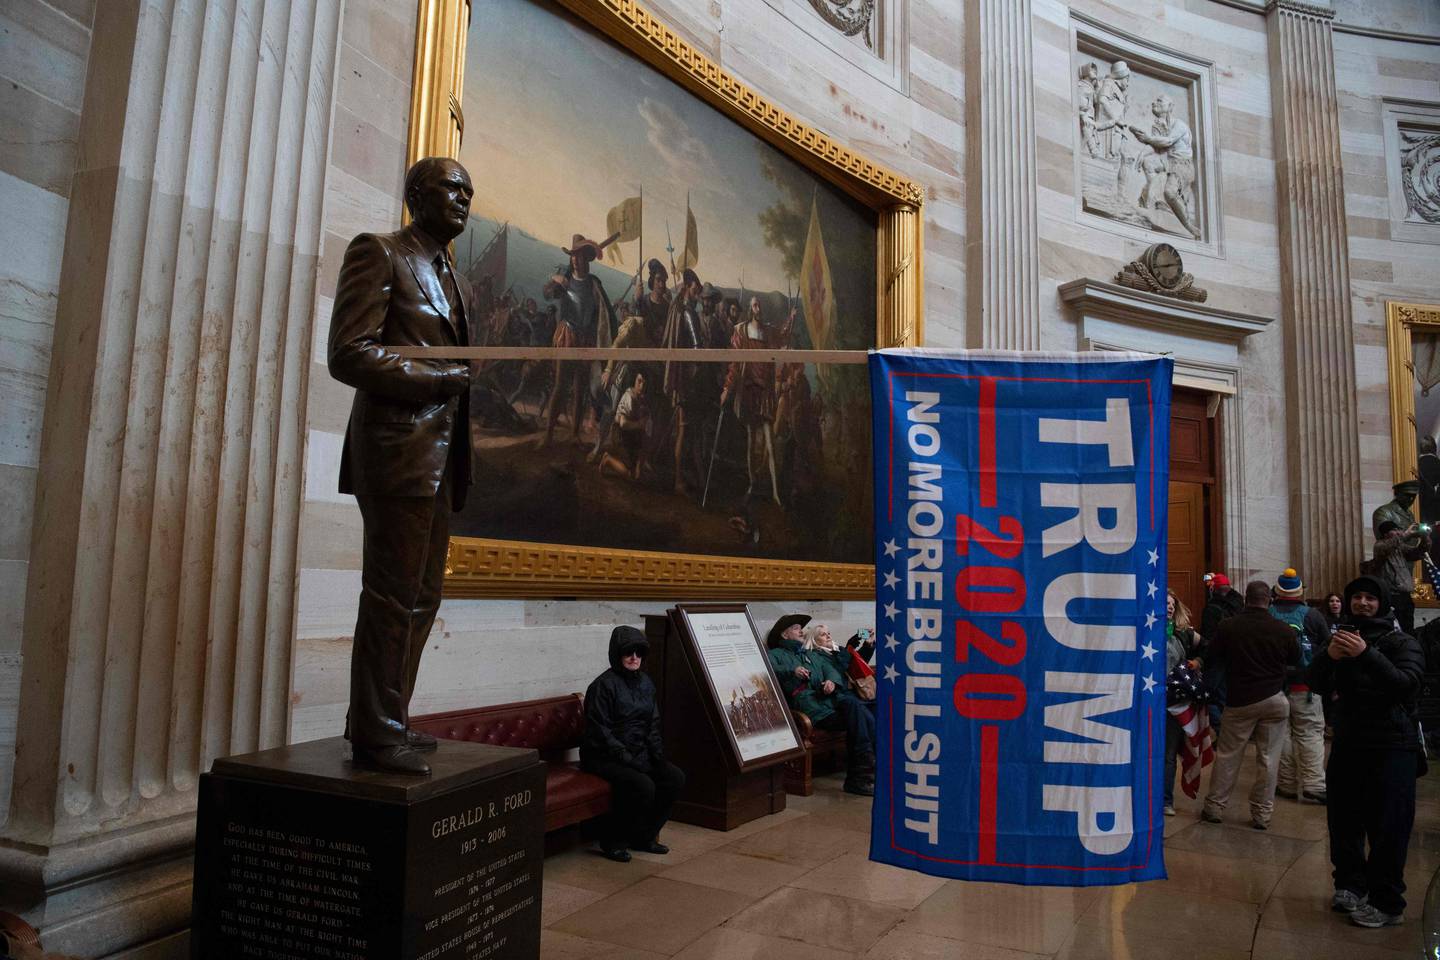 Supporters of US President Donald Trump enter the US Capitol's Rotunda on January 6, 2021, in Washington, DC. - Demonstrators breeched security and entered the Capitol as Congress debated the a 2020 presidential election Electoral Vote Certification. (Photo by SAUL LOEB / AFP)